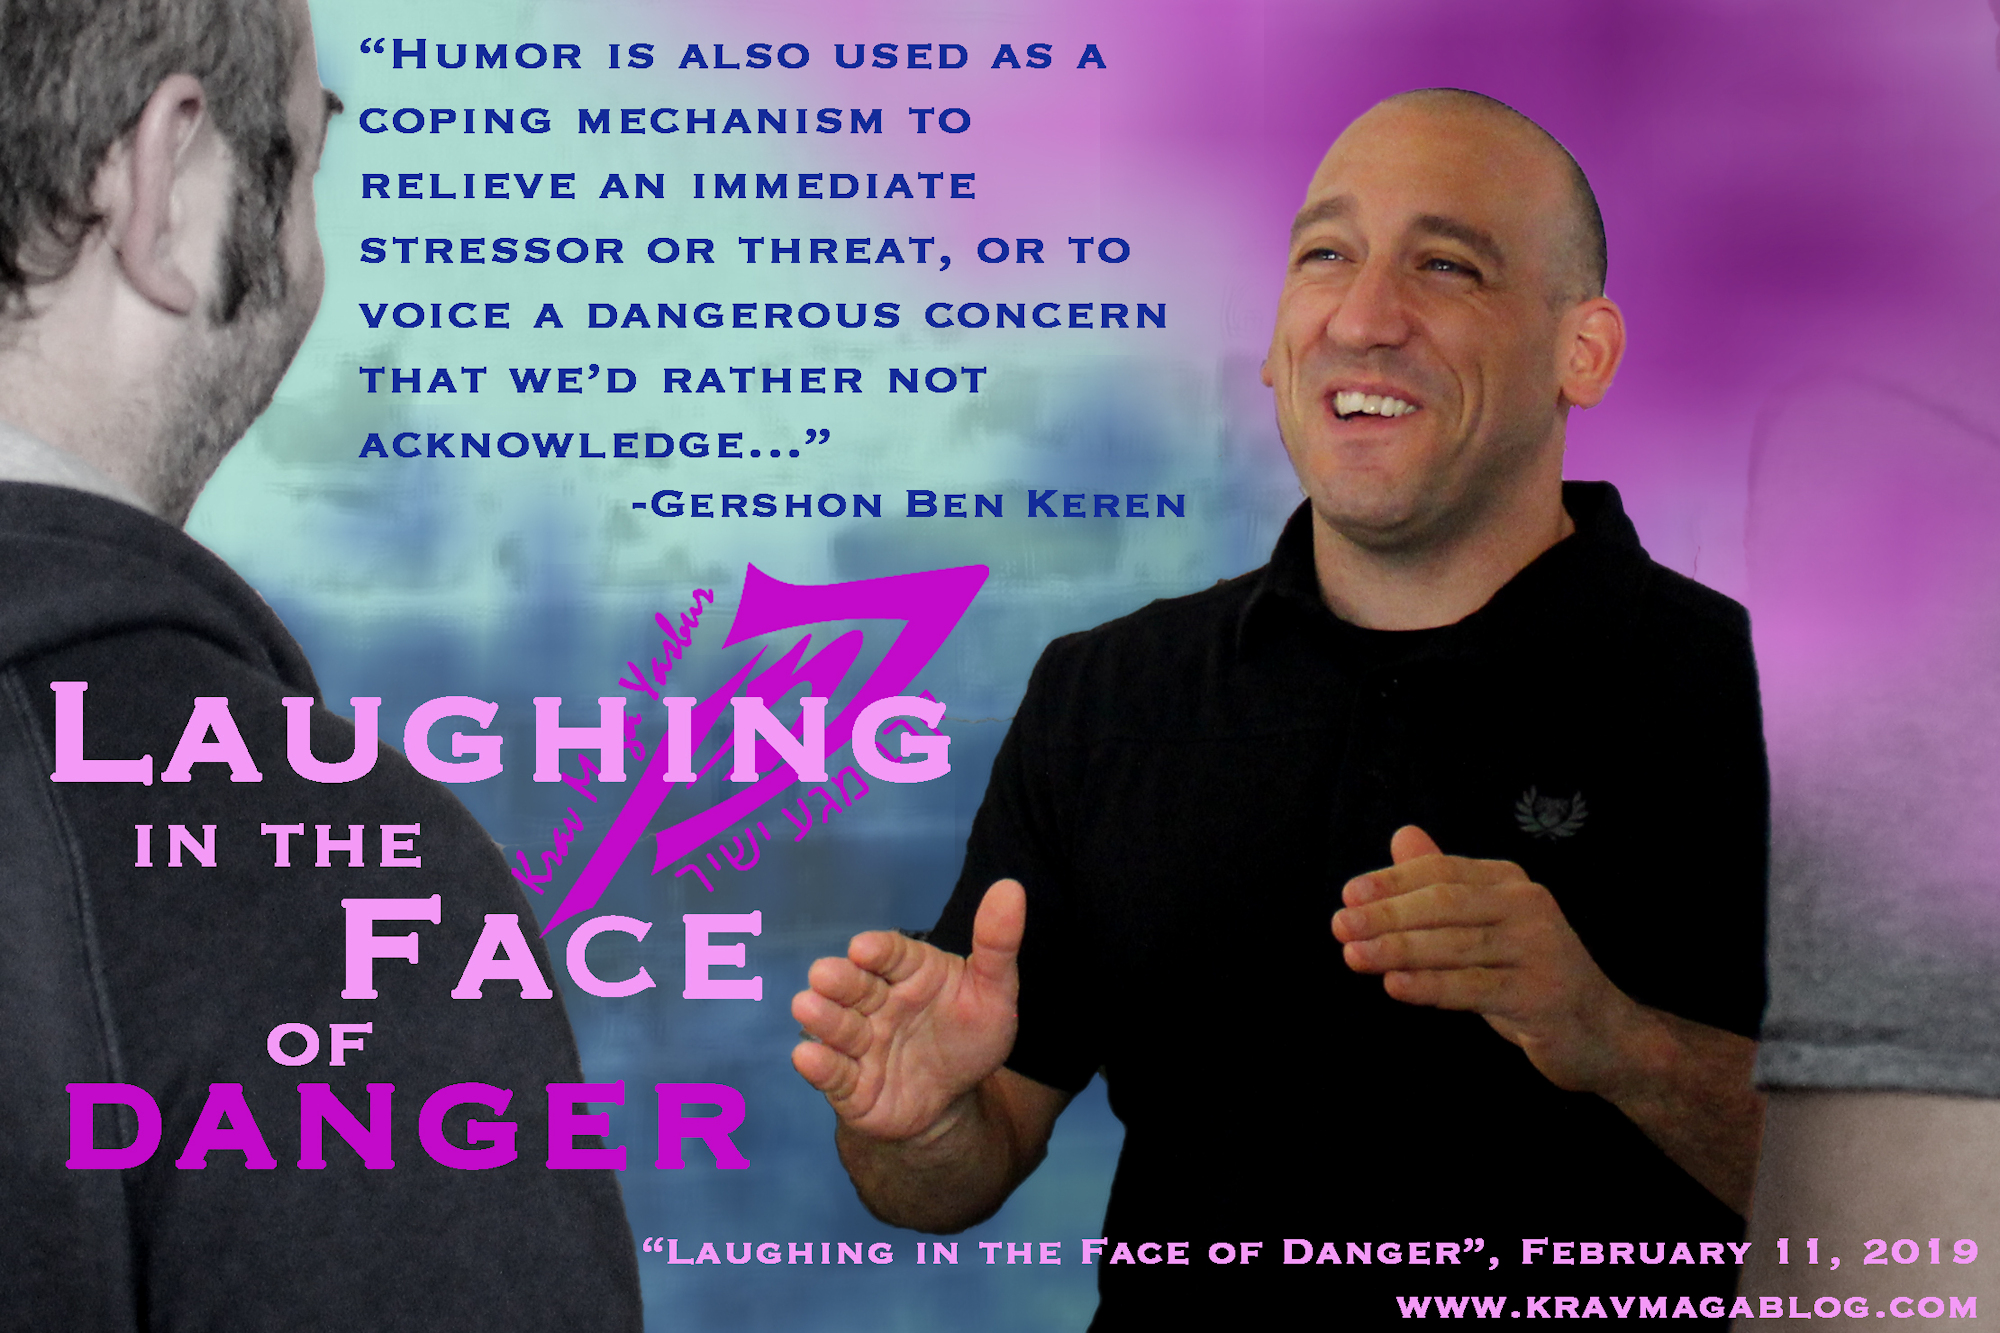 Blog About Laughing In The Face Of Danger